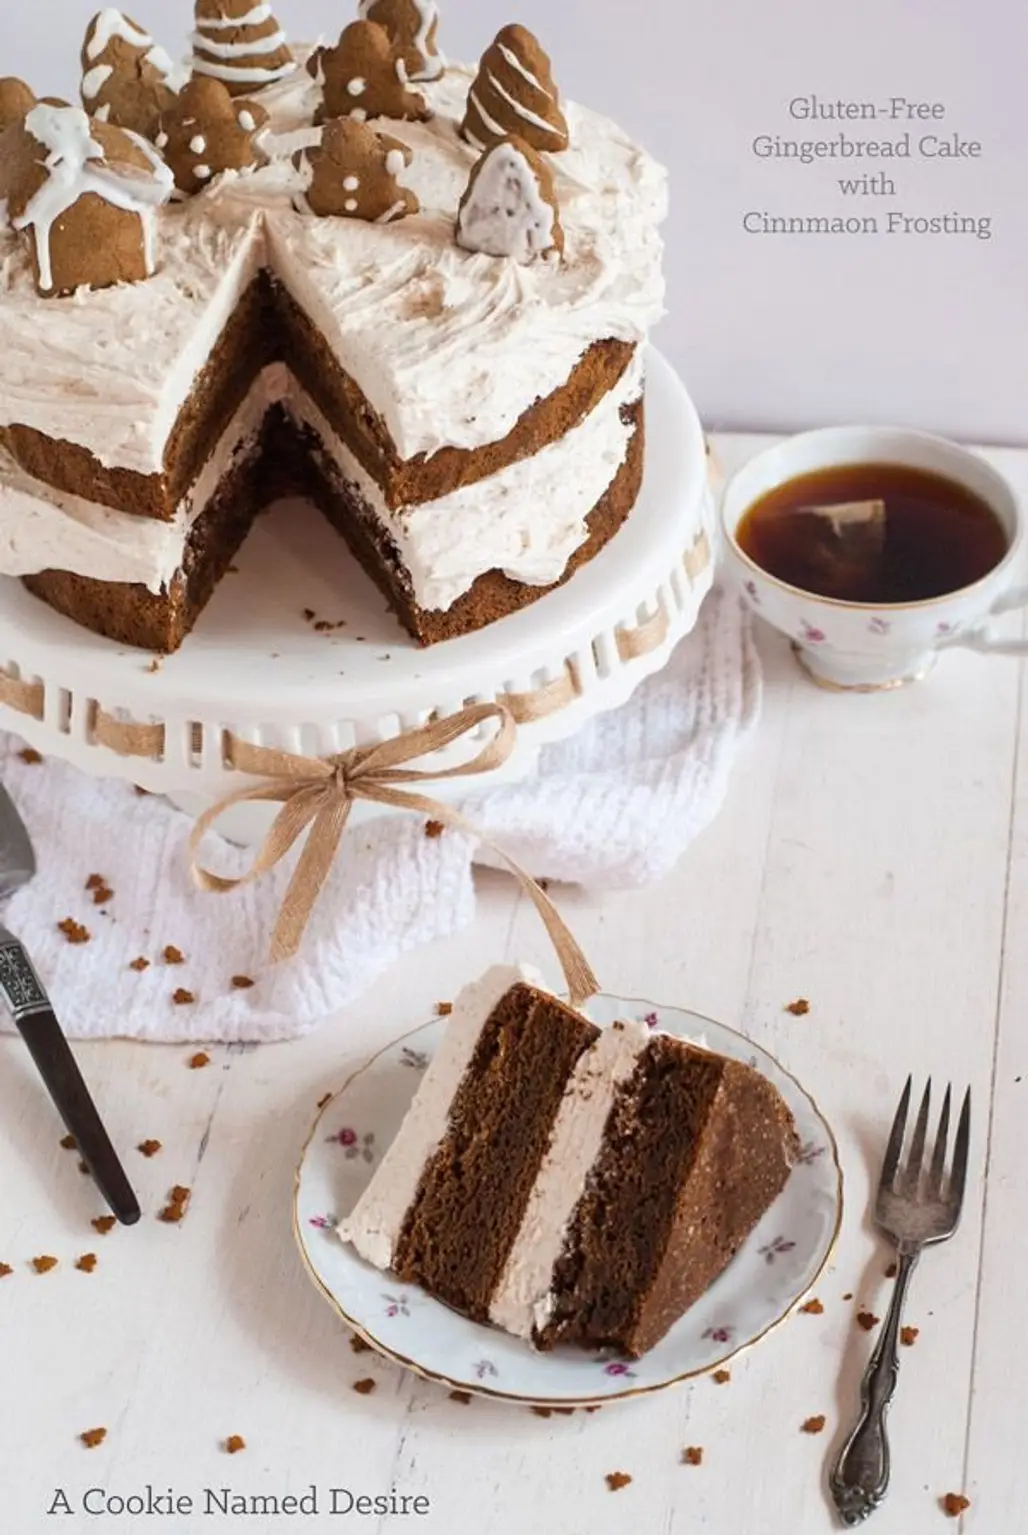 Gingerbread Cake with Cinnamon Buttercream